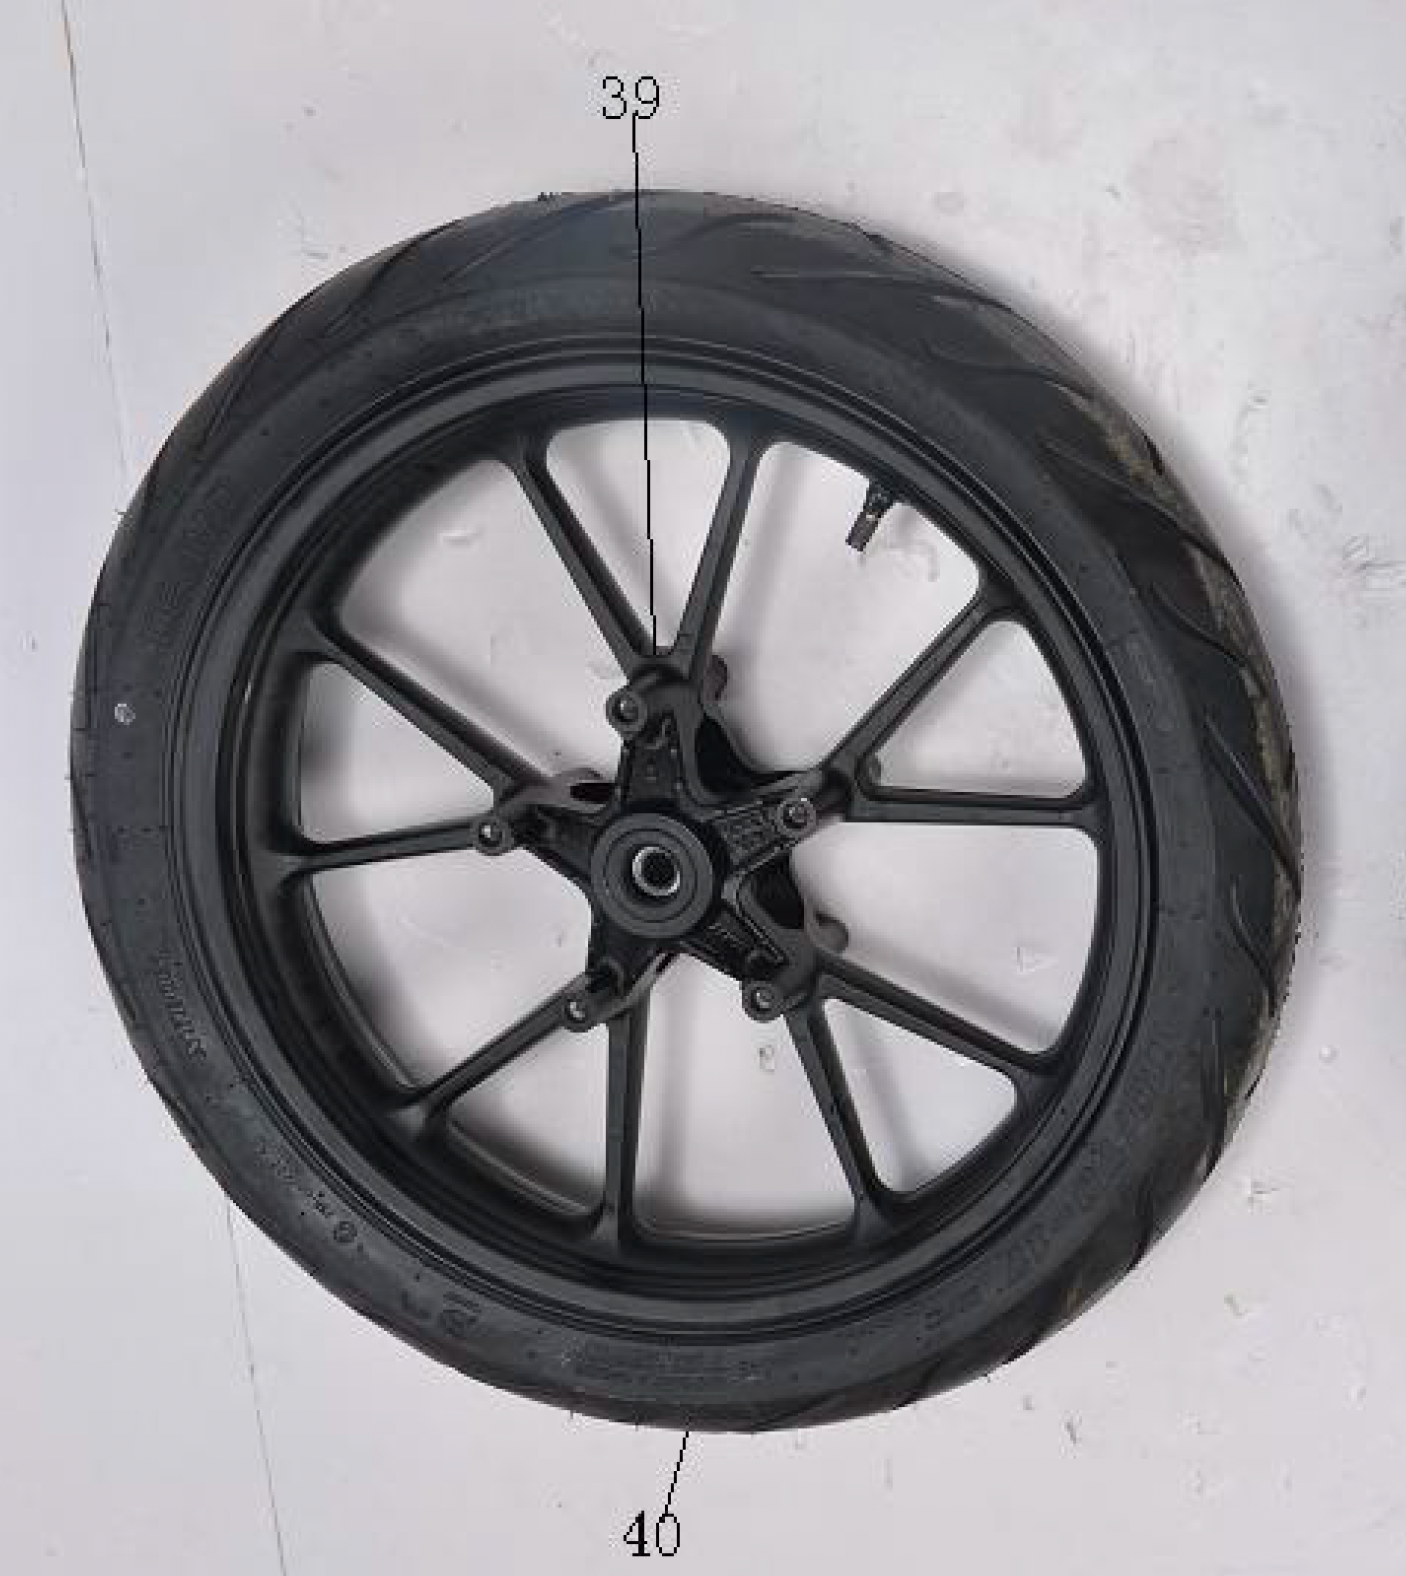 Front tire and rim for BD125-11. Venom X22 tires